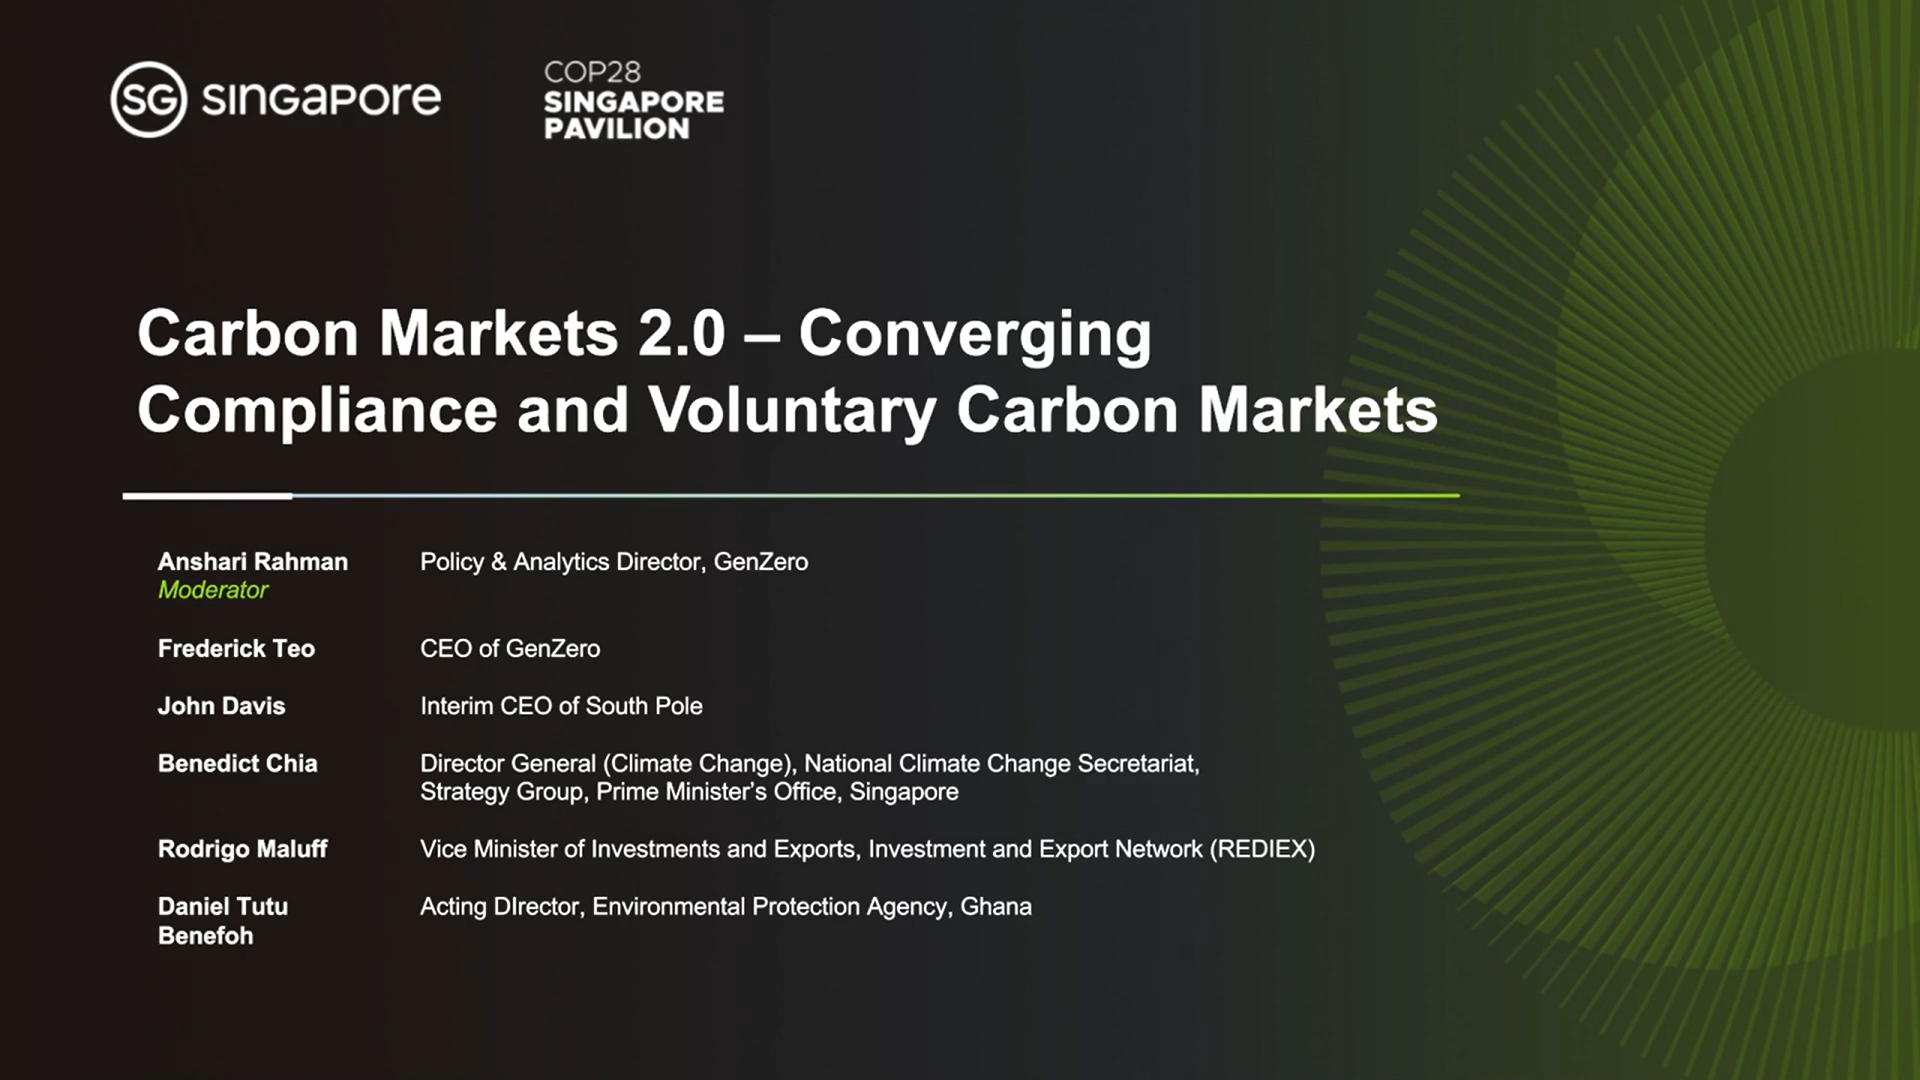 Carbon Markets 2.0 - Converging Compliance and Voluntary Carbon Markets